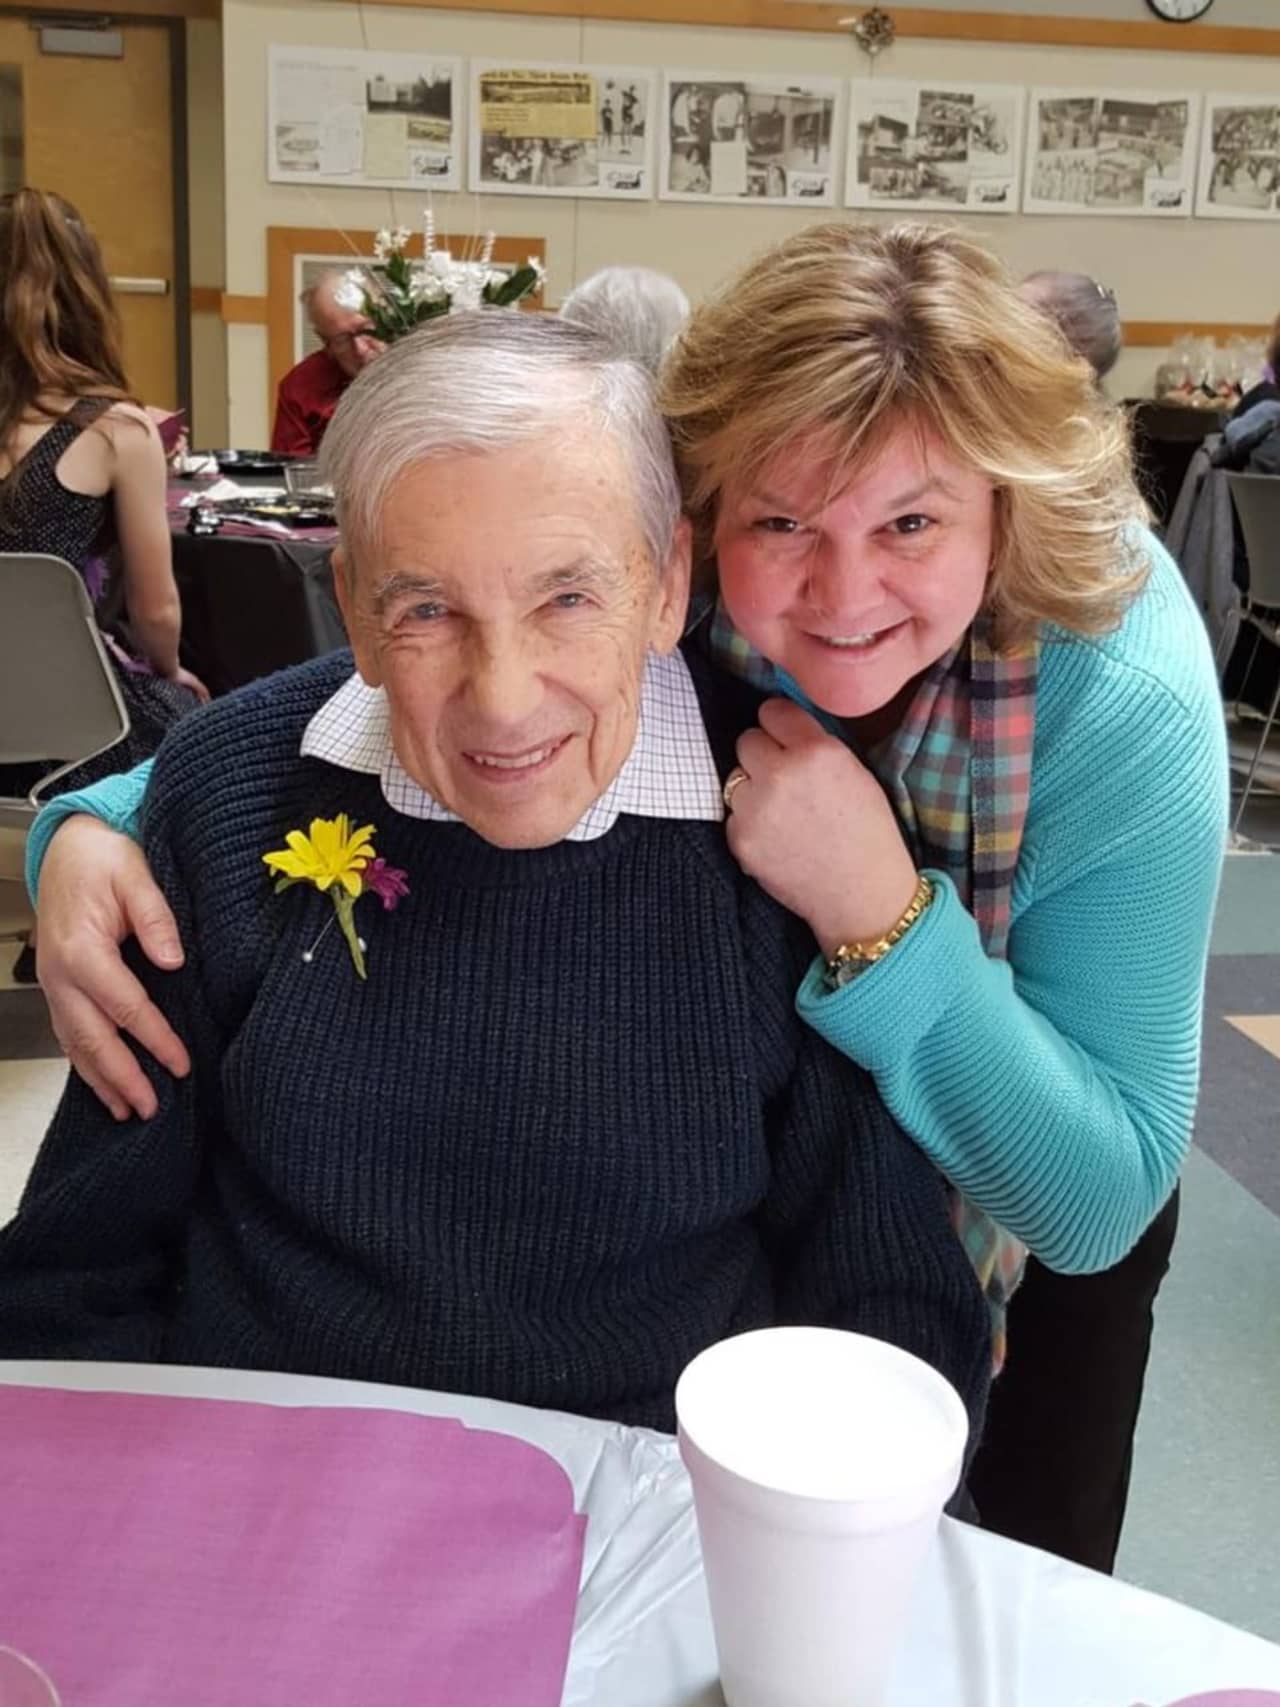 The Bridges by EPOCH at Norwalk will present "Understanding Alzheimer’s" Jan. 25 at the DoubleTree. A resident of one of Bridges assisted living communities in New England is shown here.